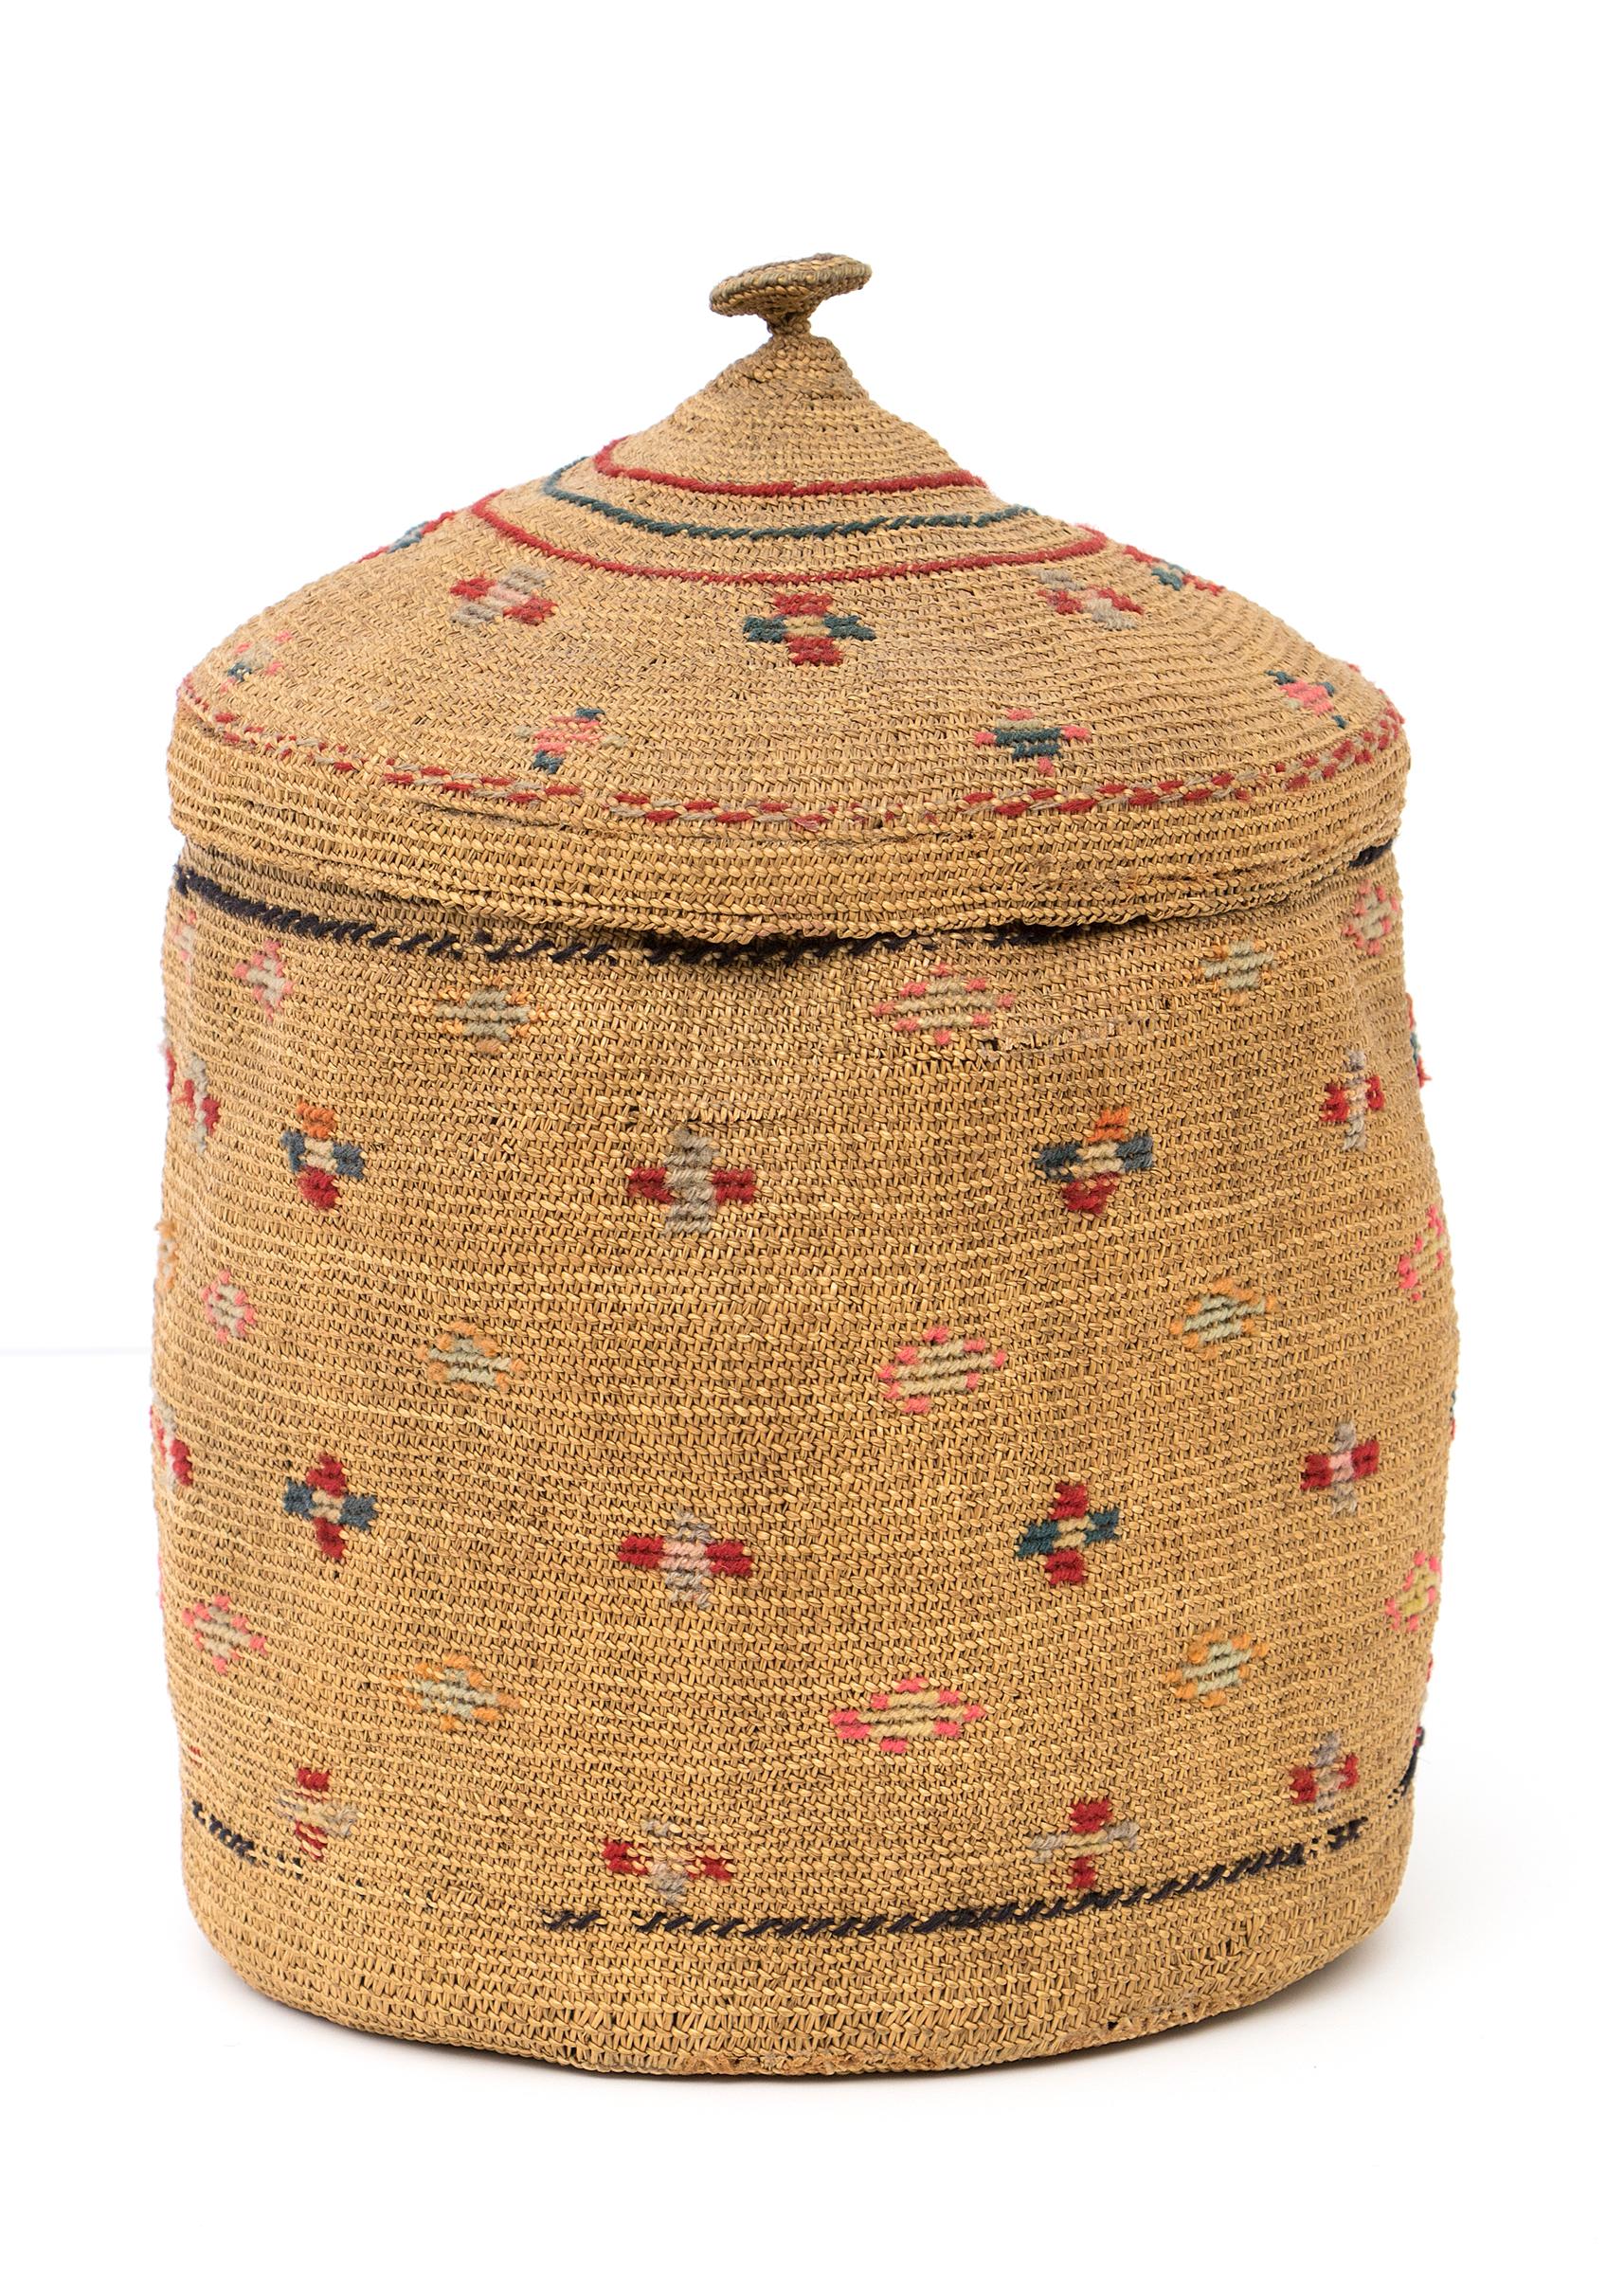 Lidded basket very finely woven of native grasses incorporating geometric designs including crosses of red, gray, green and yellow yarns circa 1900

Basket is in very good antique condition - please contact us for a complete condition report.

The